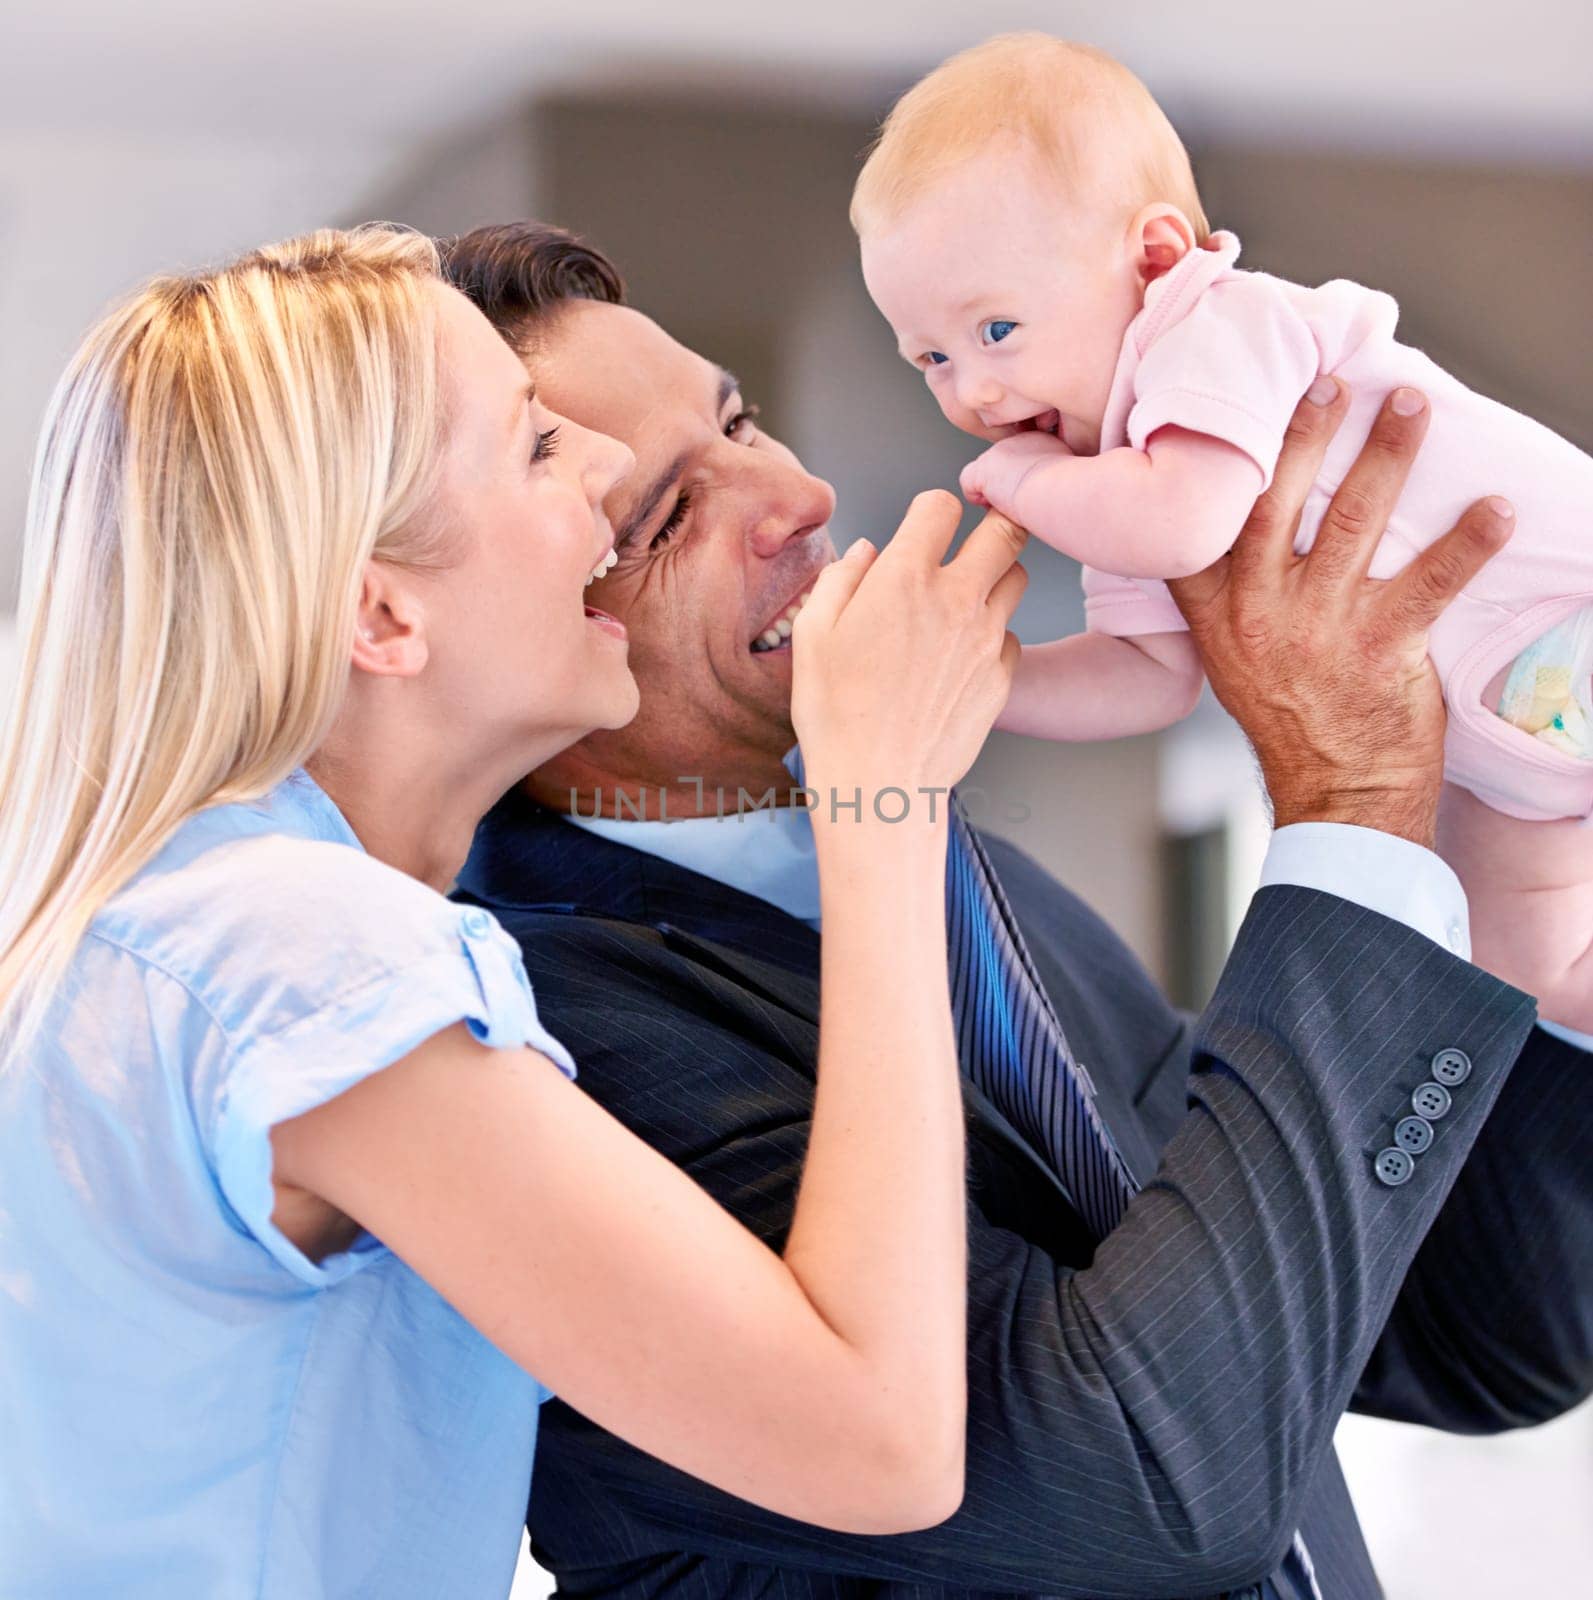 Family, happy and parents with baby in living room for bonding, affection and childcare at home. Infant, smile and cheerful for interaction with mother, father and healthy relationship in house.